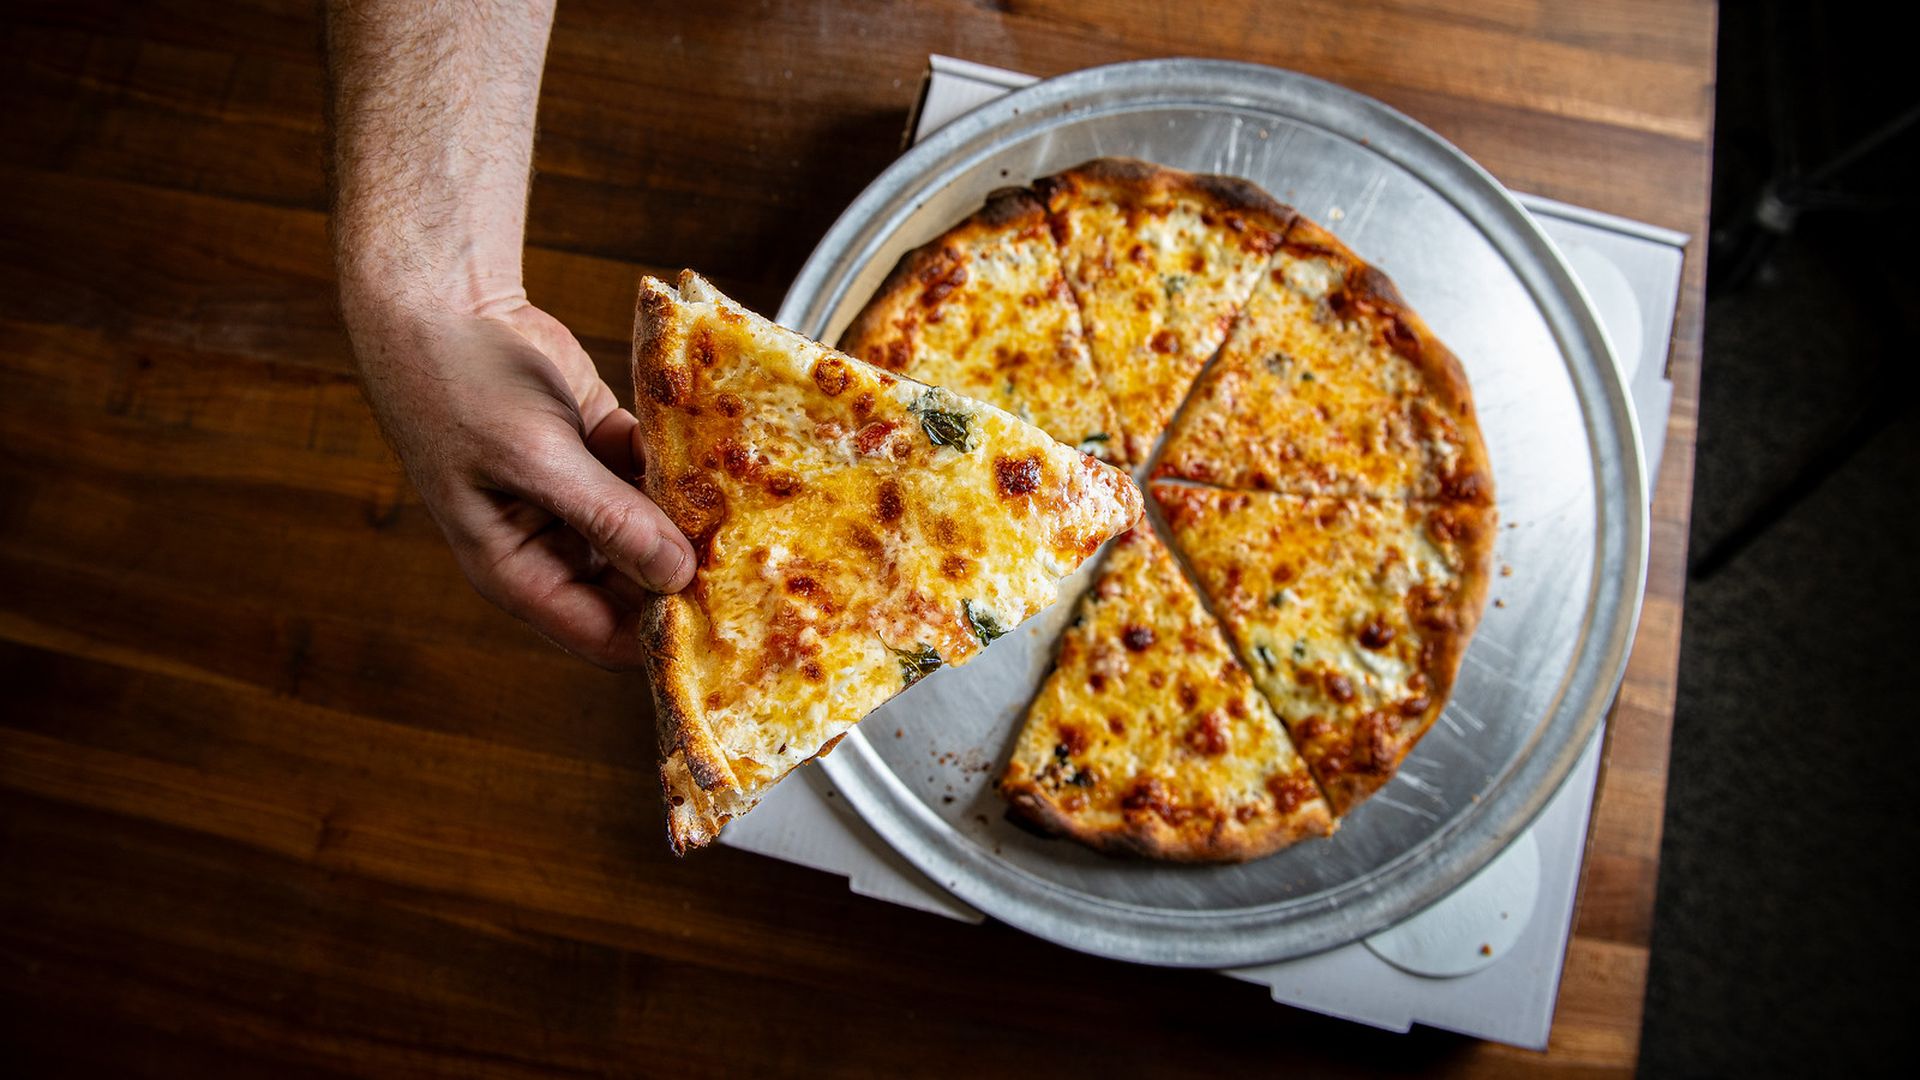 A hand holds a piece of pizza above a whole pie that's on a metal plate on a table